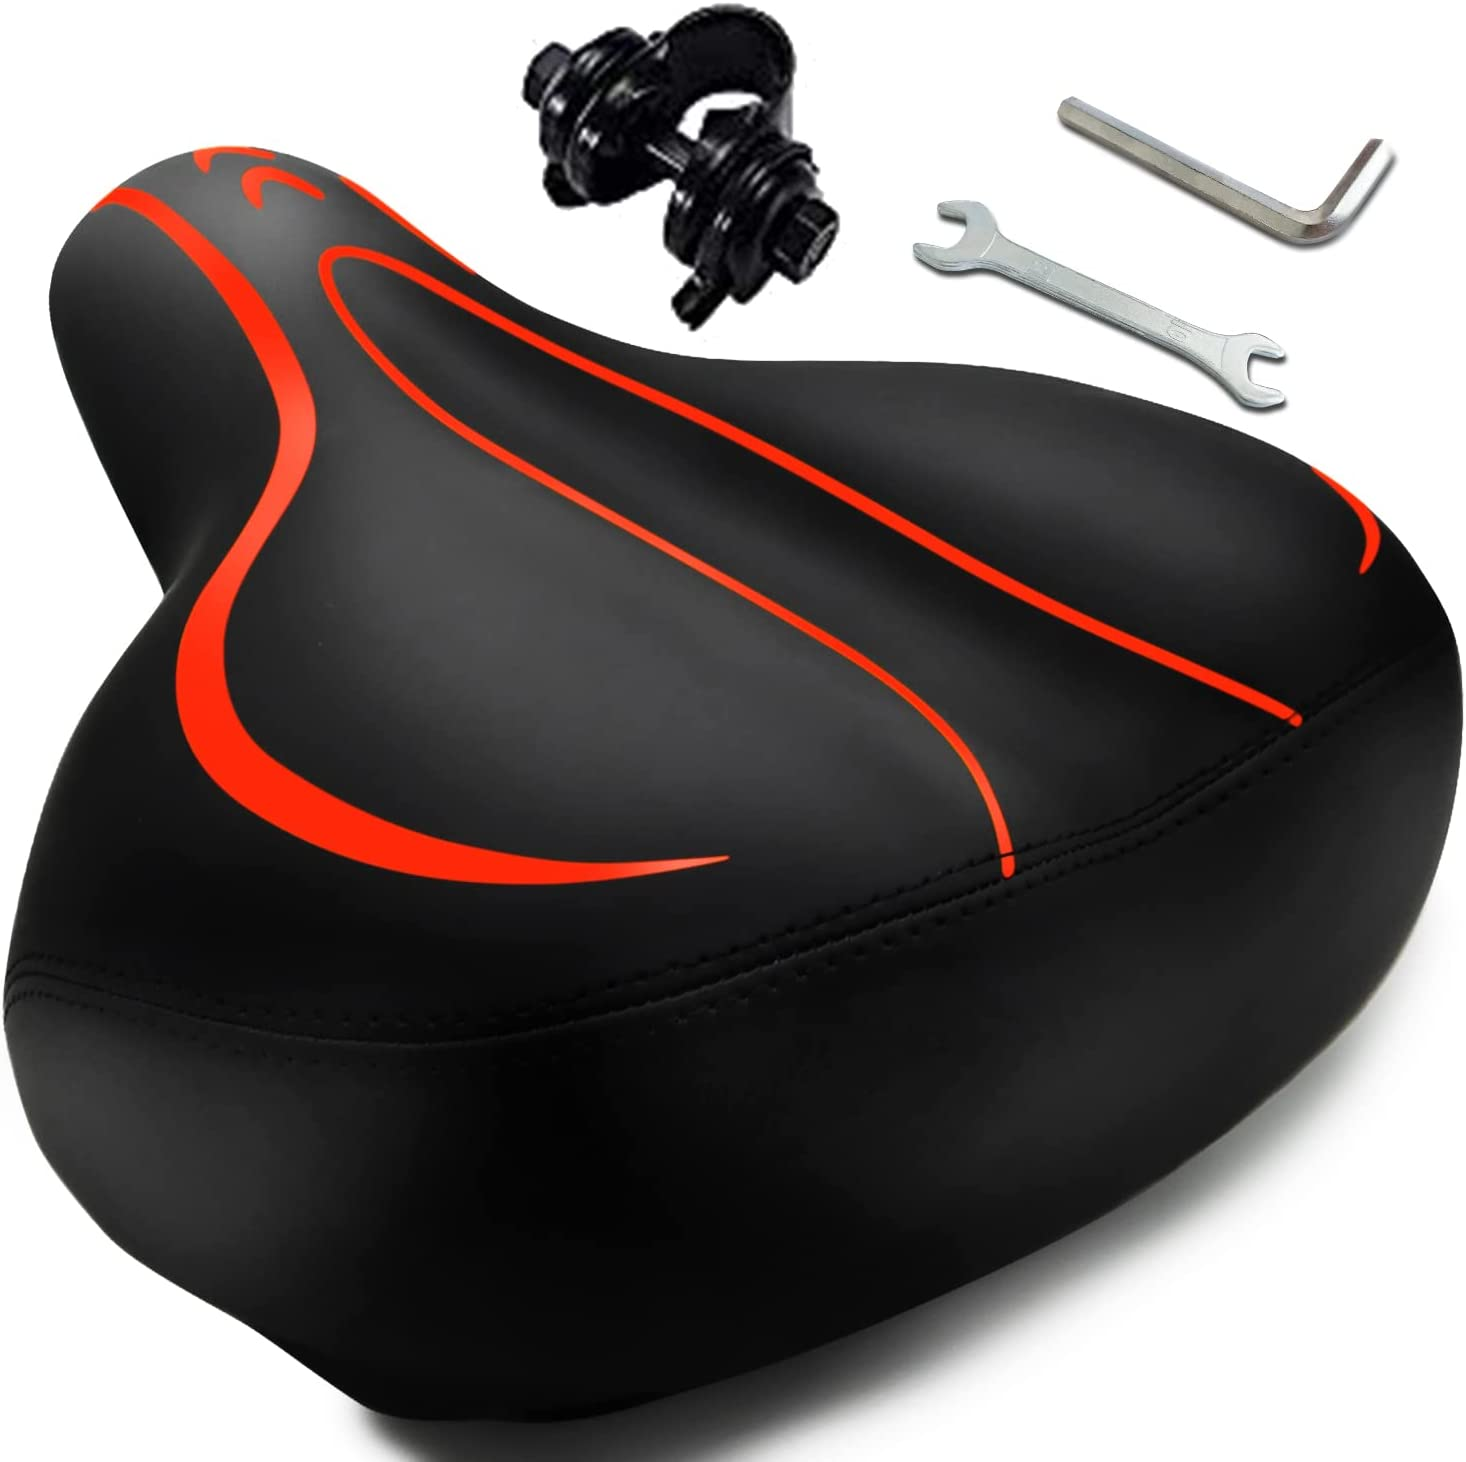 Mountain bike saddle pain can be reduced by buying a saddle that has extra padding.